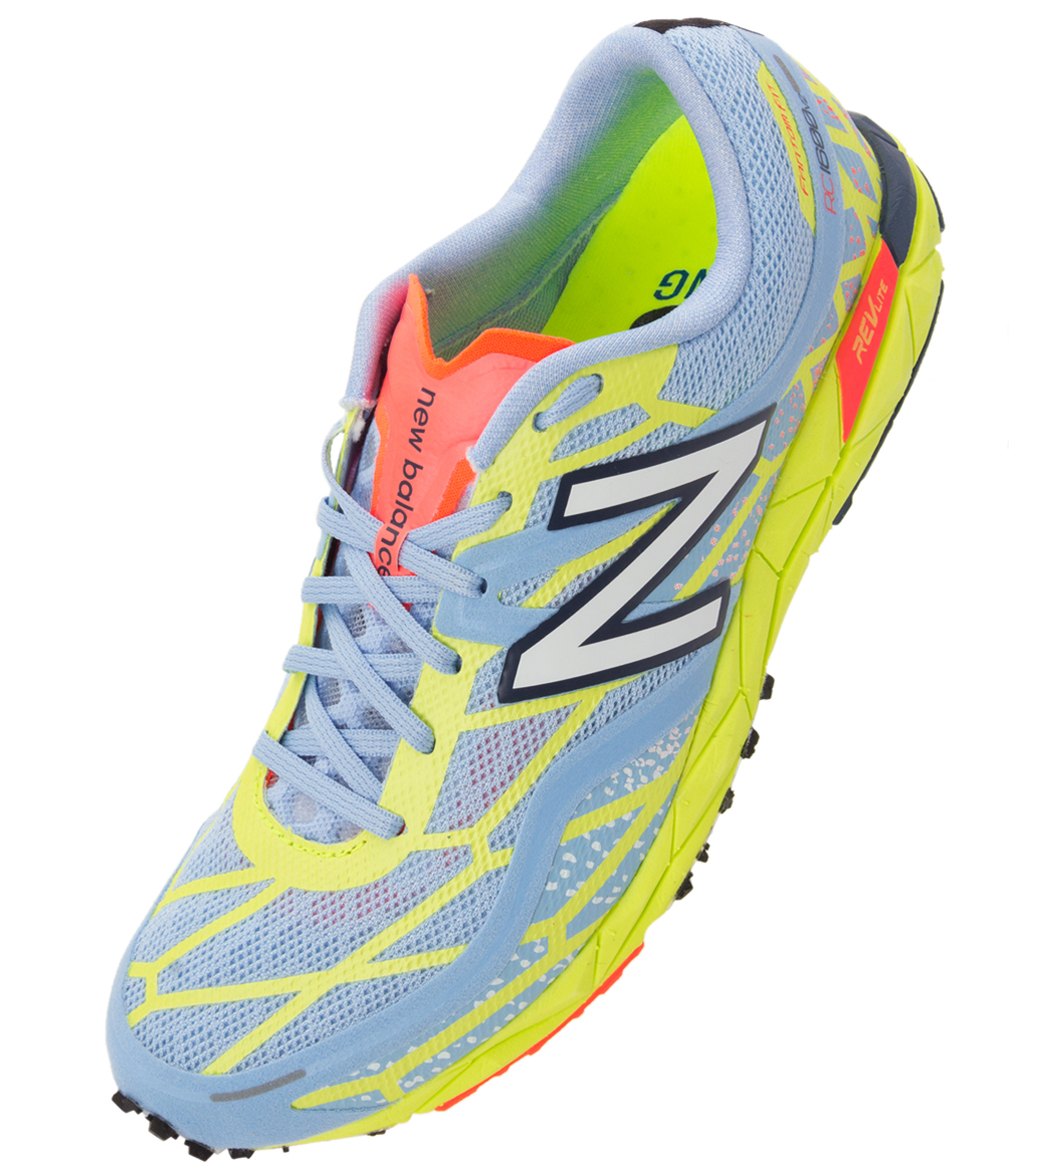 New Balance Women\u0027s RC 1600v2 Running Shoes at SwimOutlet.com - Free  Shipping